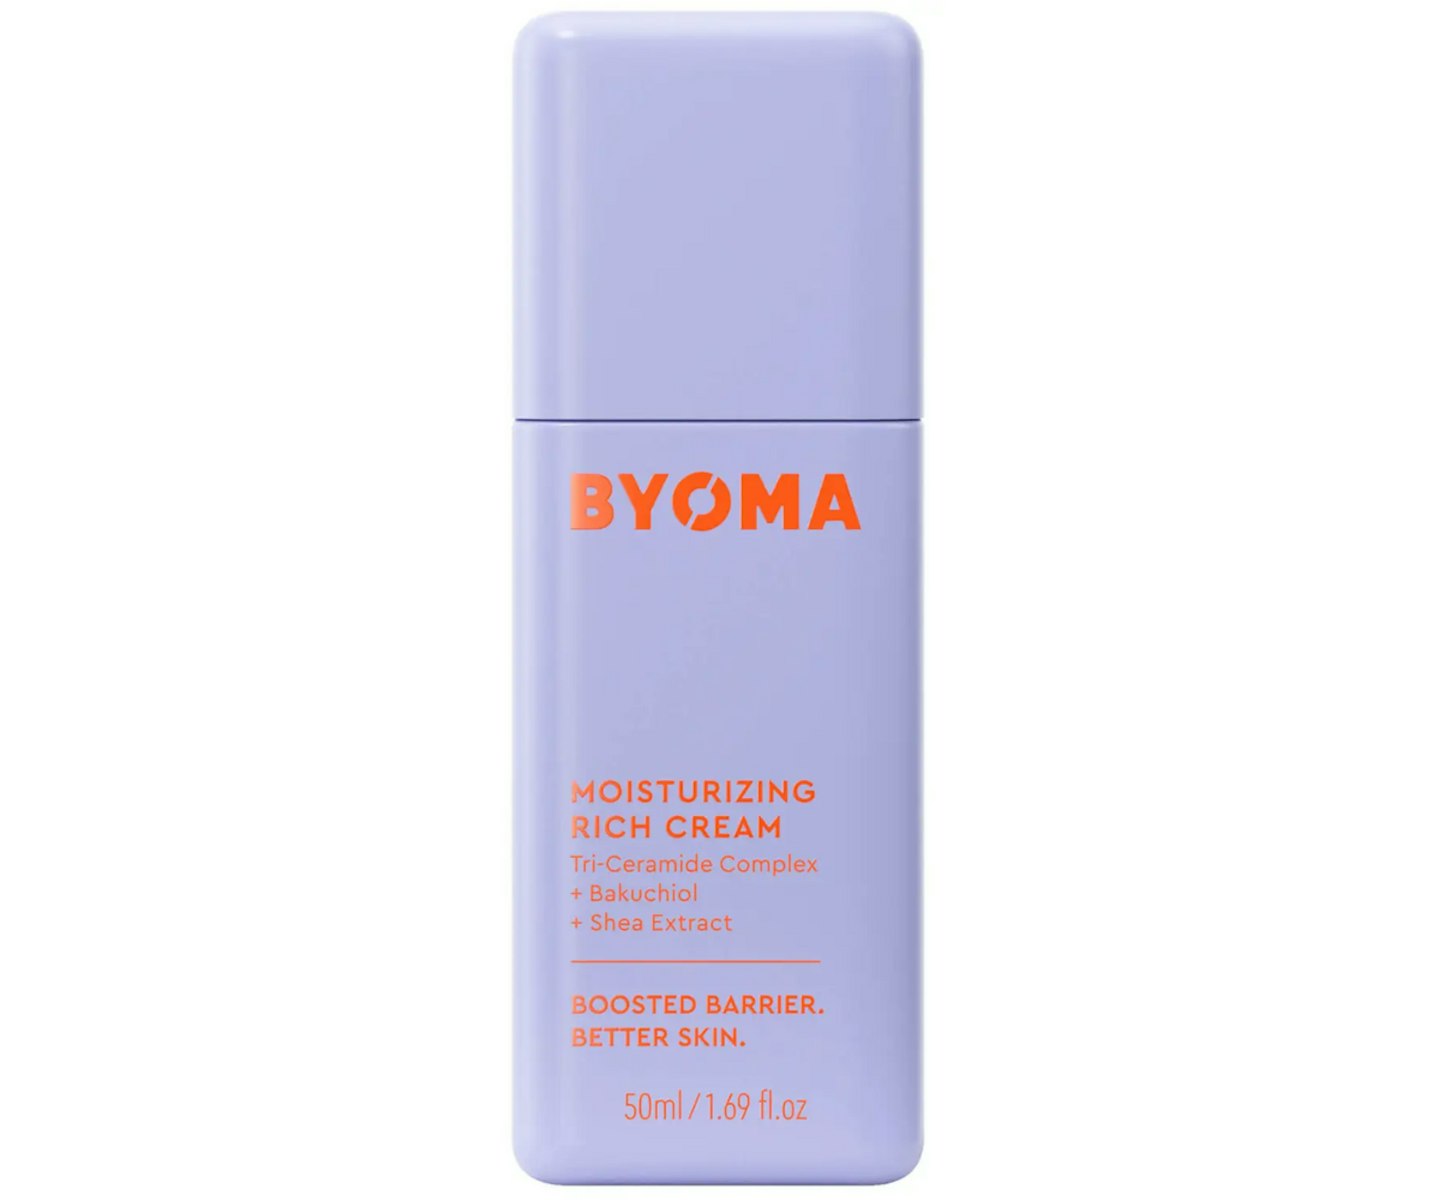 A picture of the Byoma Moisturising Rich Cream